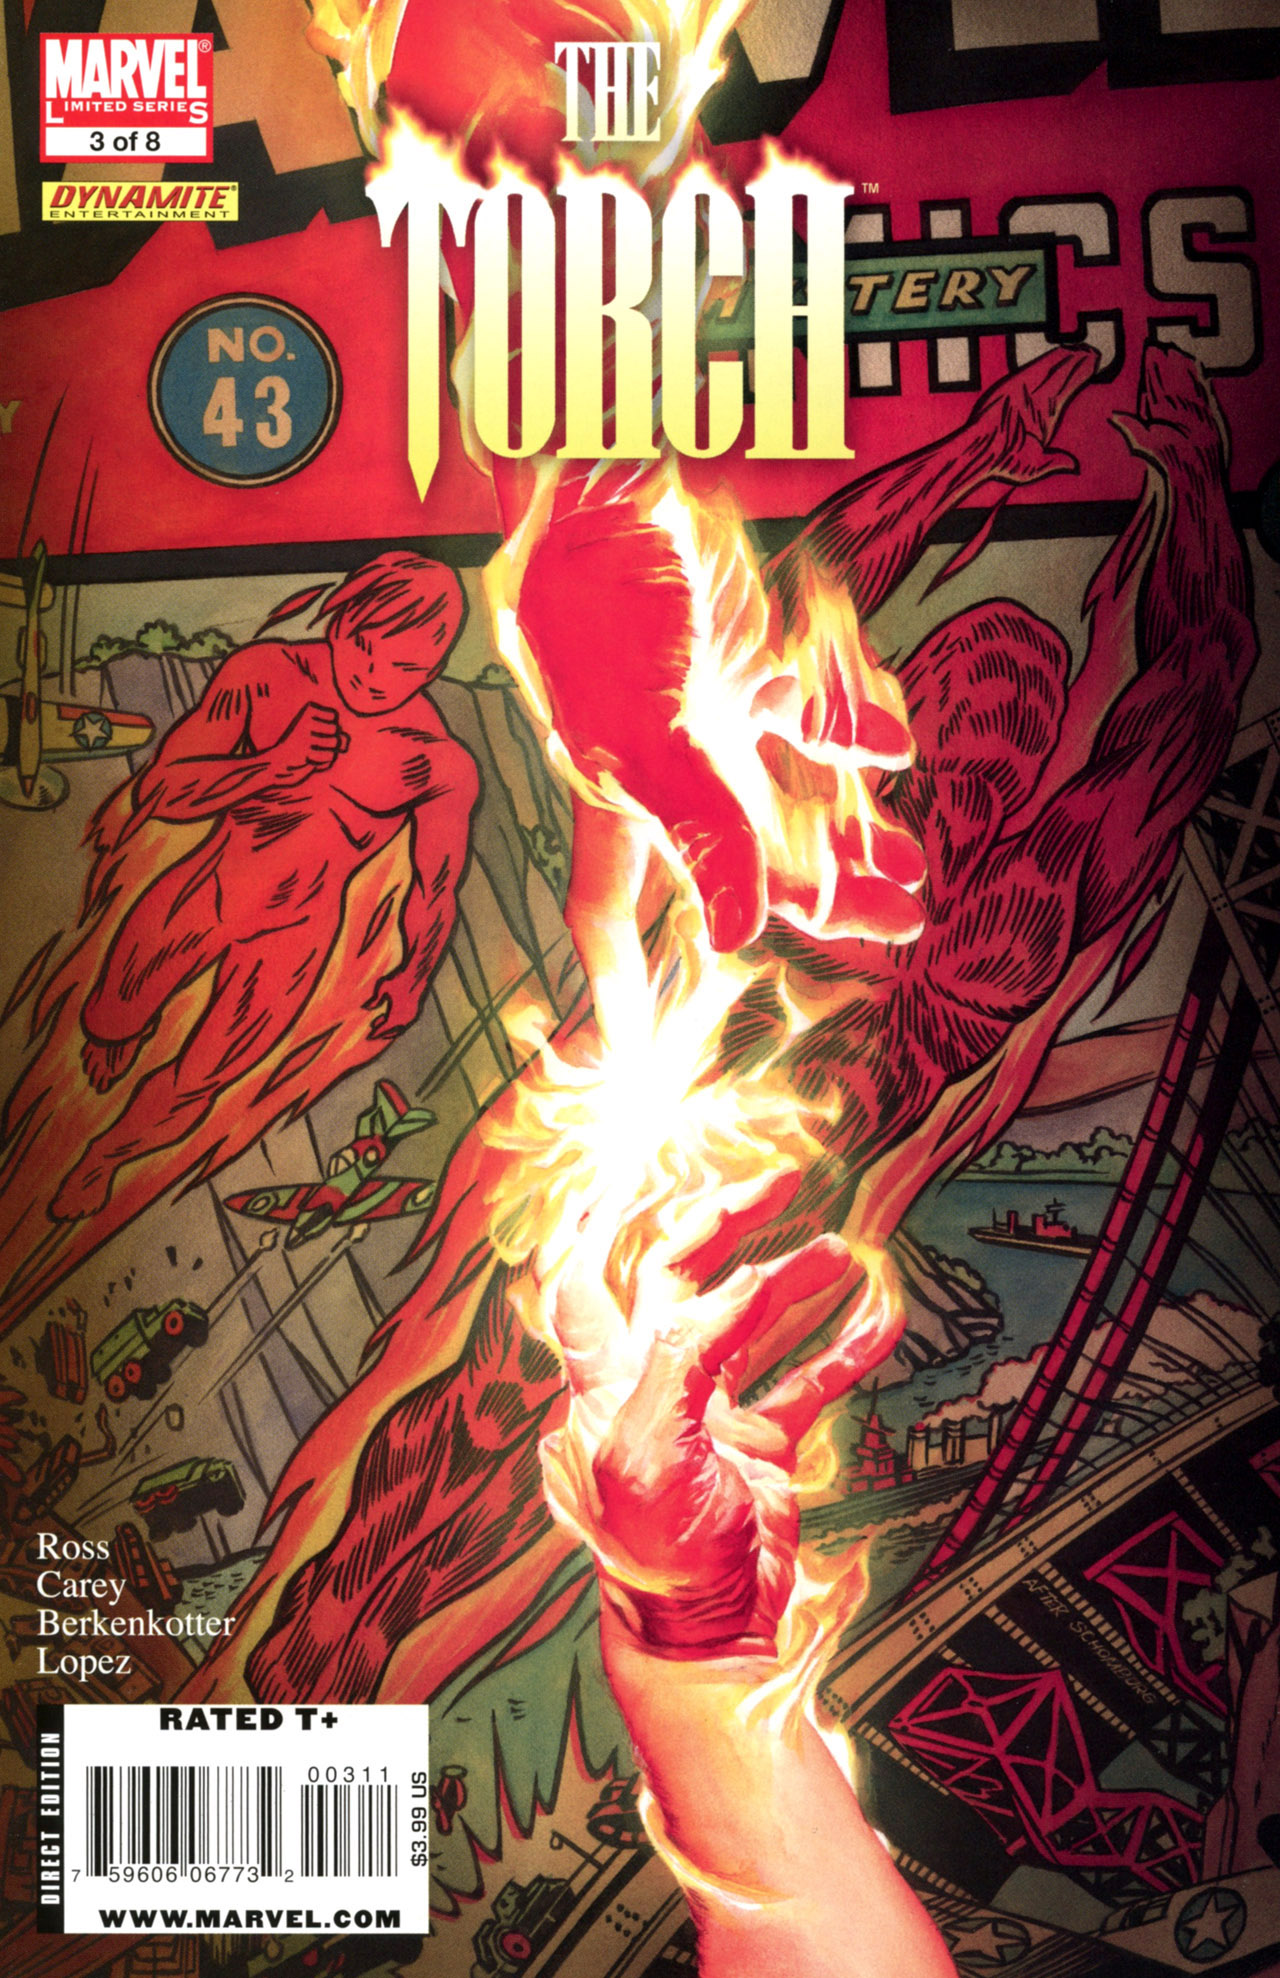 Read online The Torch comic -  Issue #3 - 1